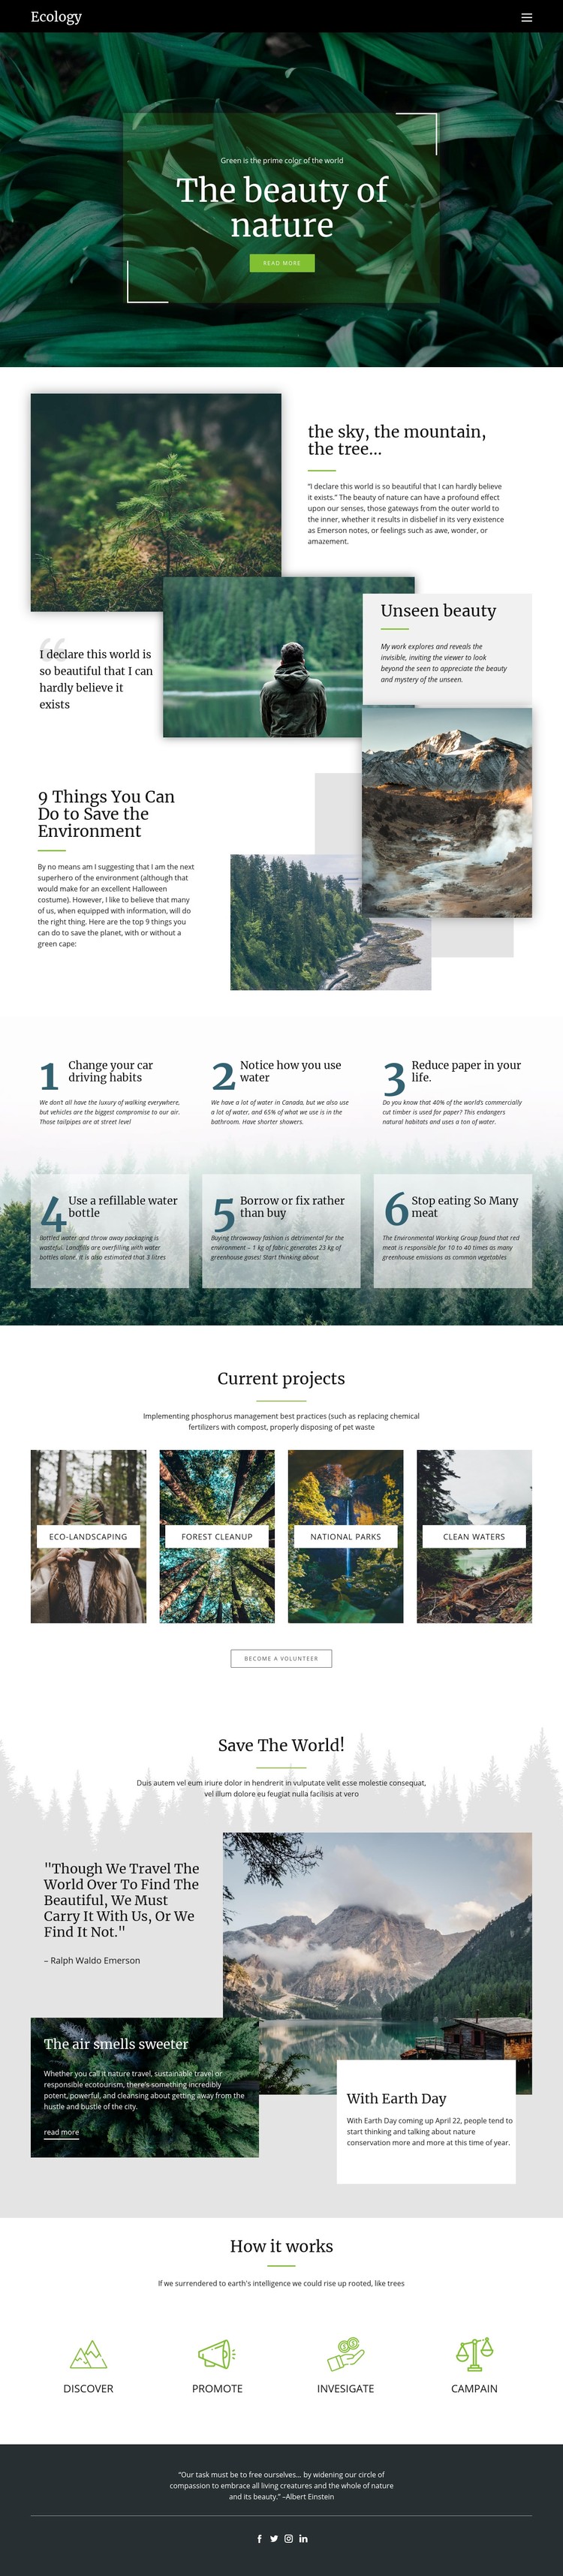 Skies and beauty of nature Webflow Template Alternative